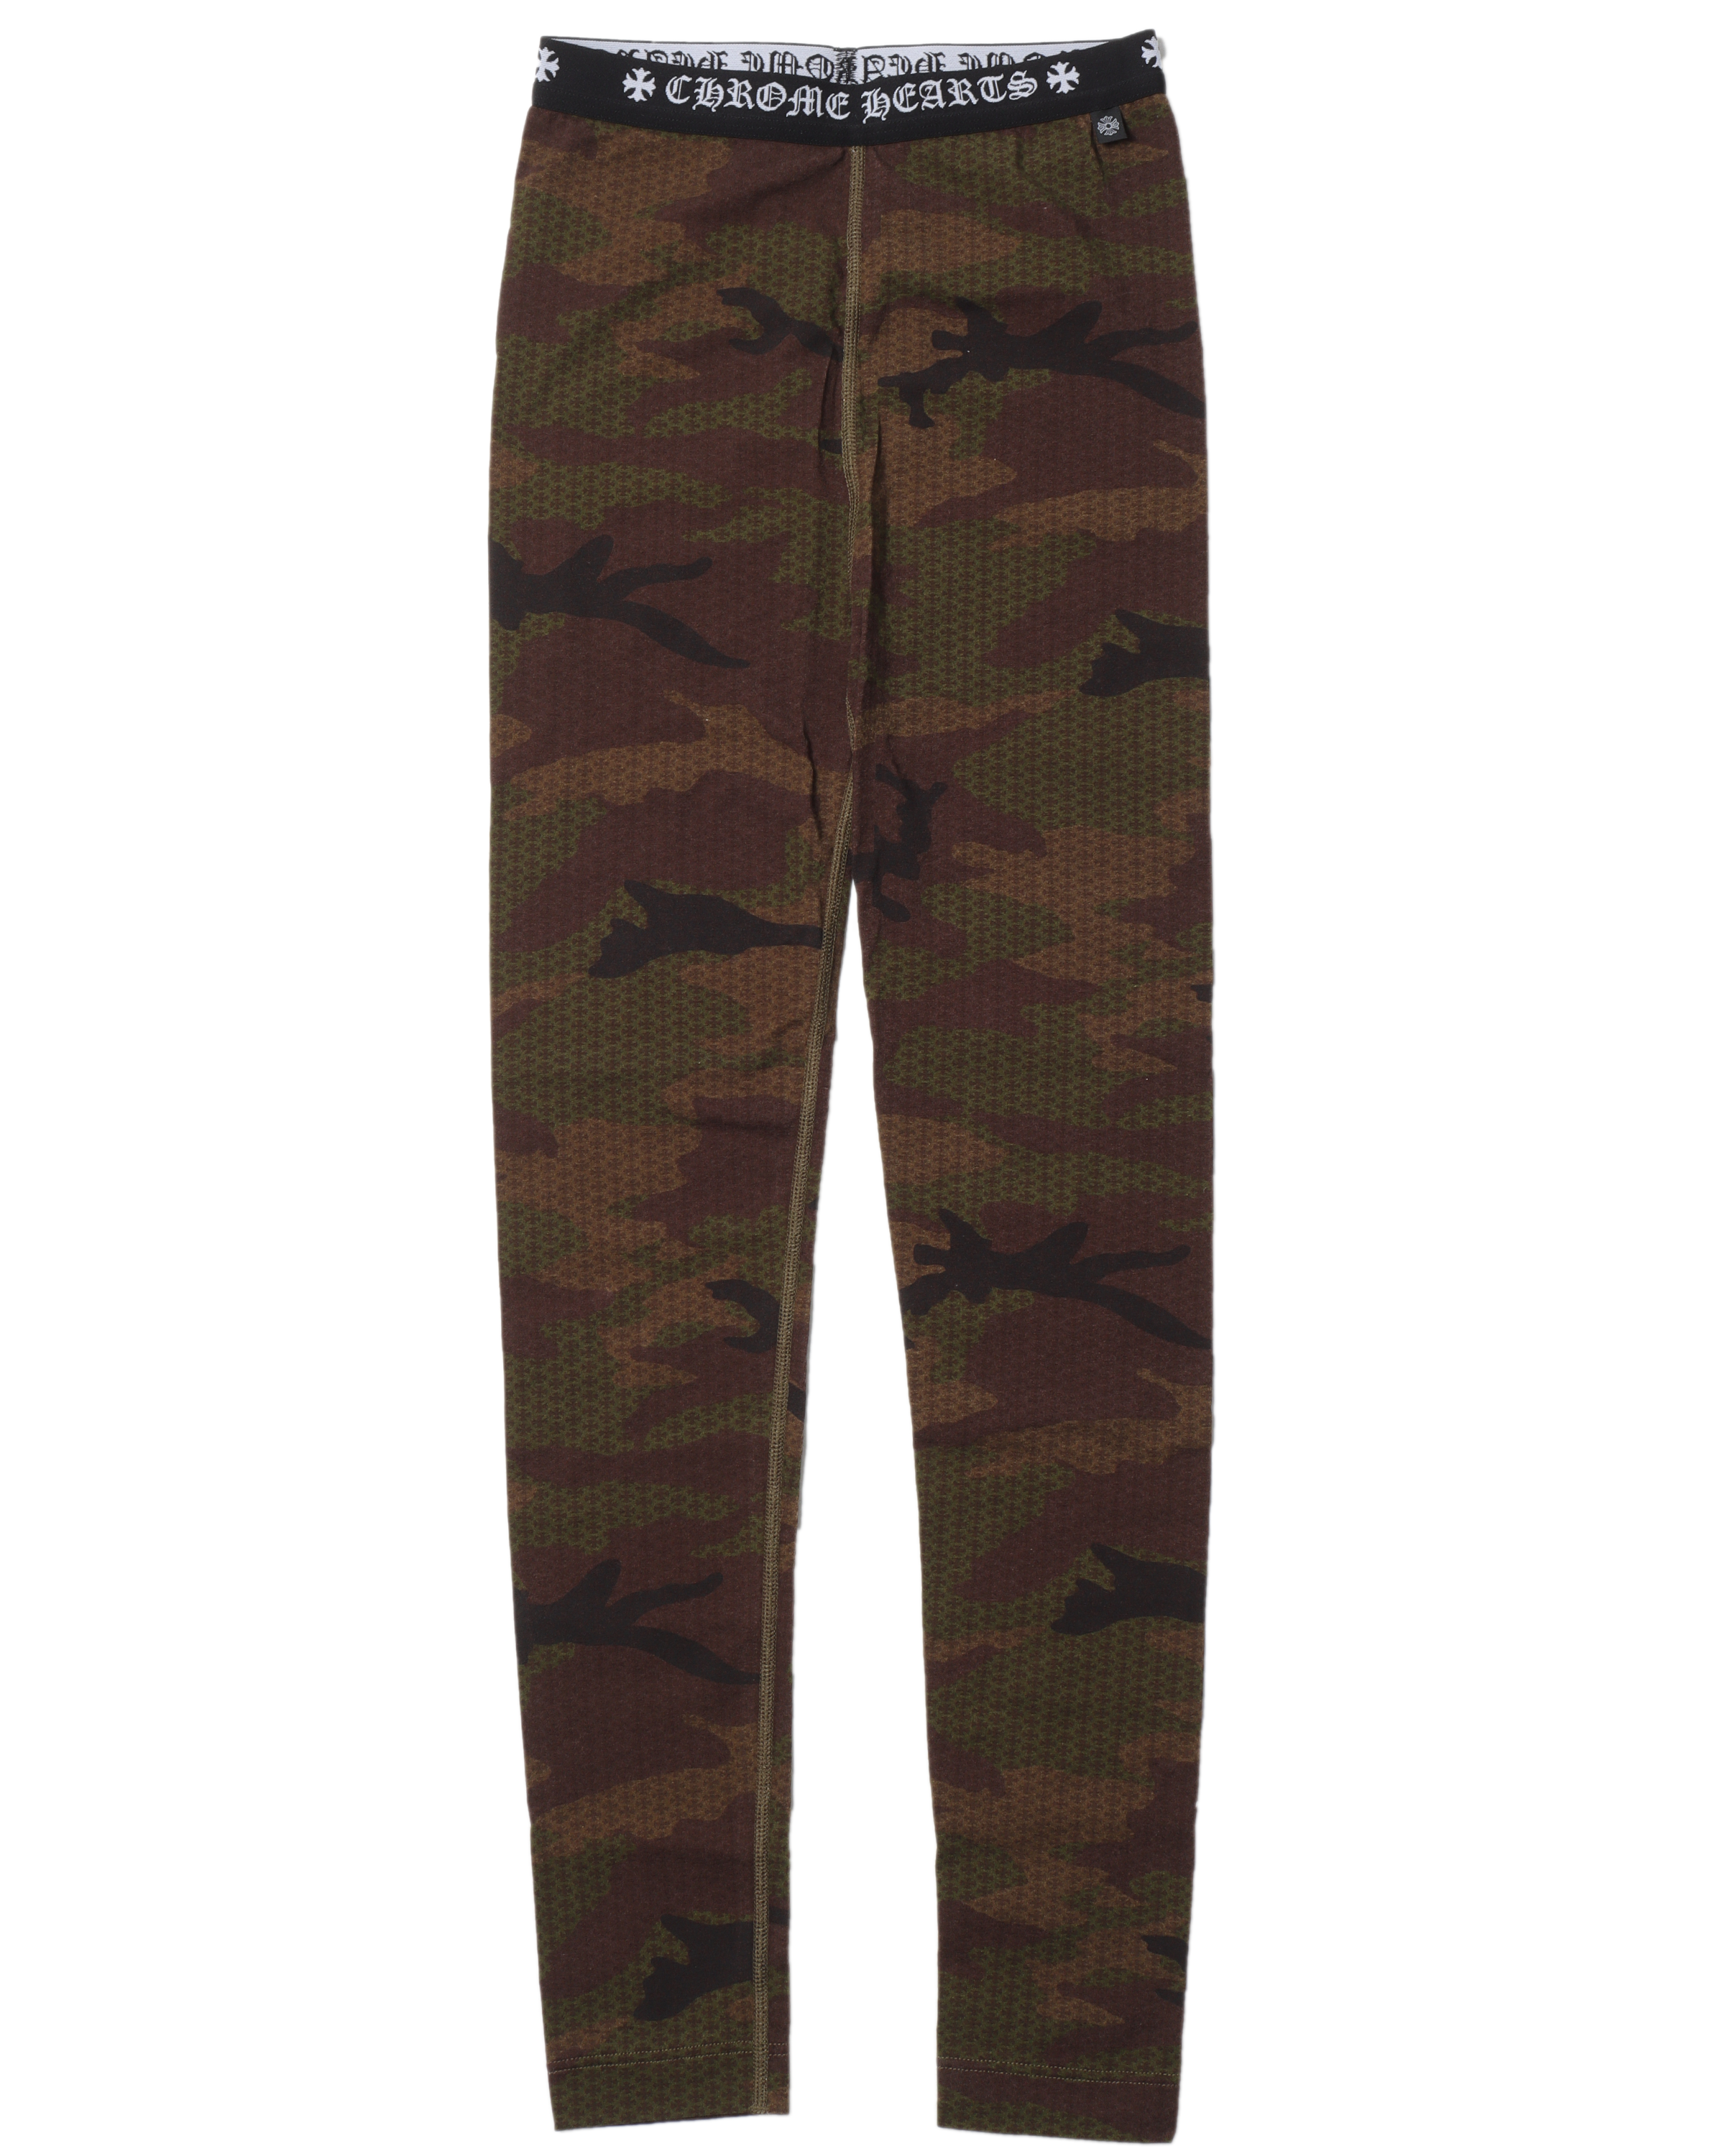 Chrome Hearts camouflage tights pants